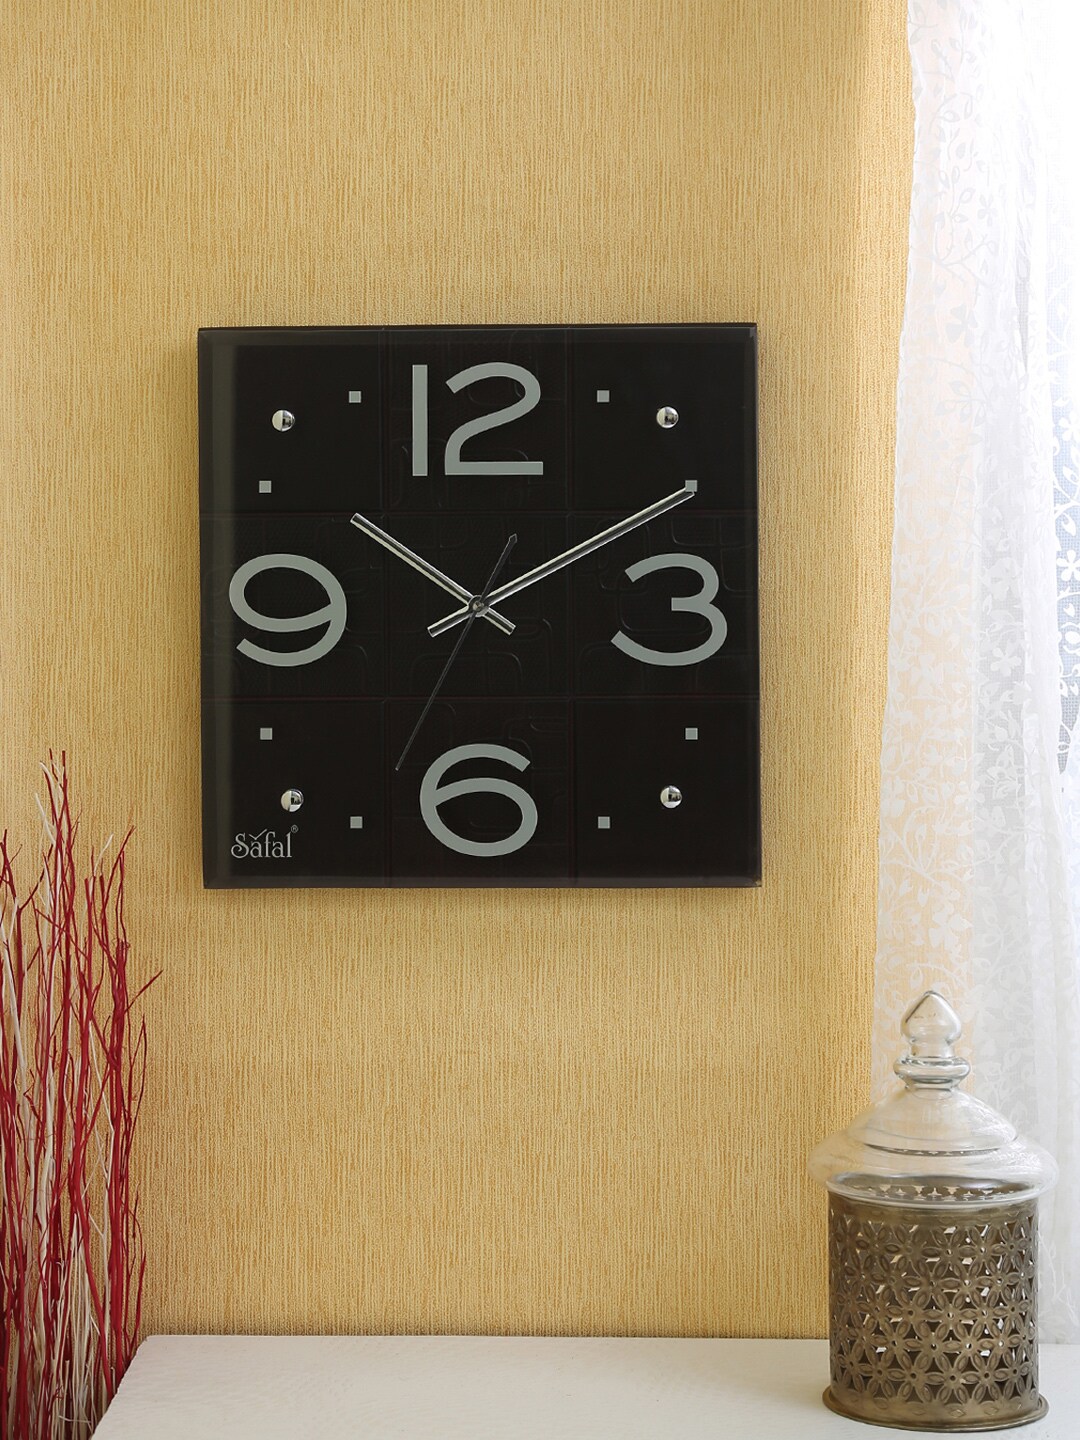 Safal Brown Dial Wooden 30 x 30 cm Analogue Wall Clock Price in India